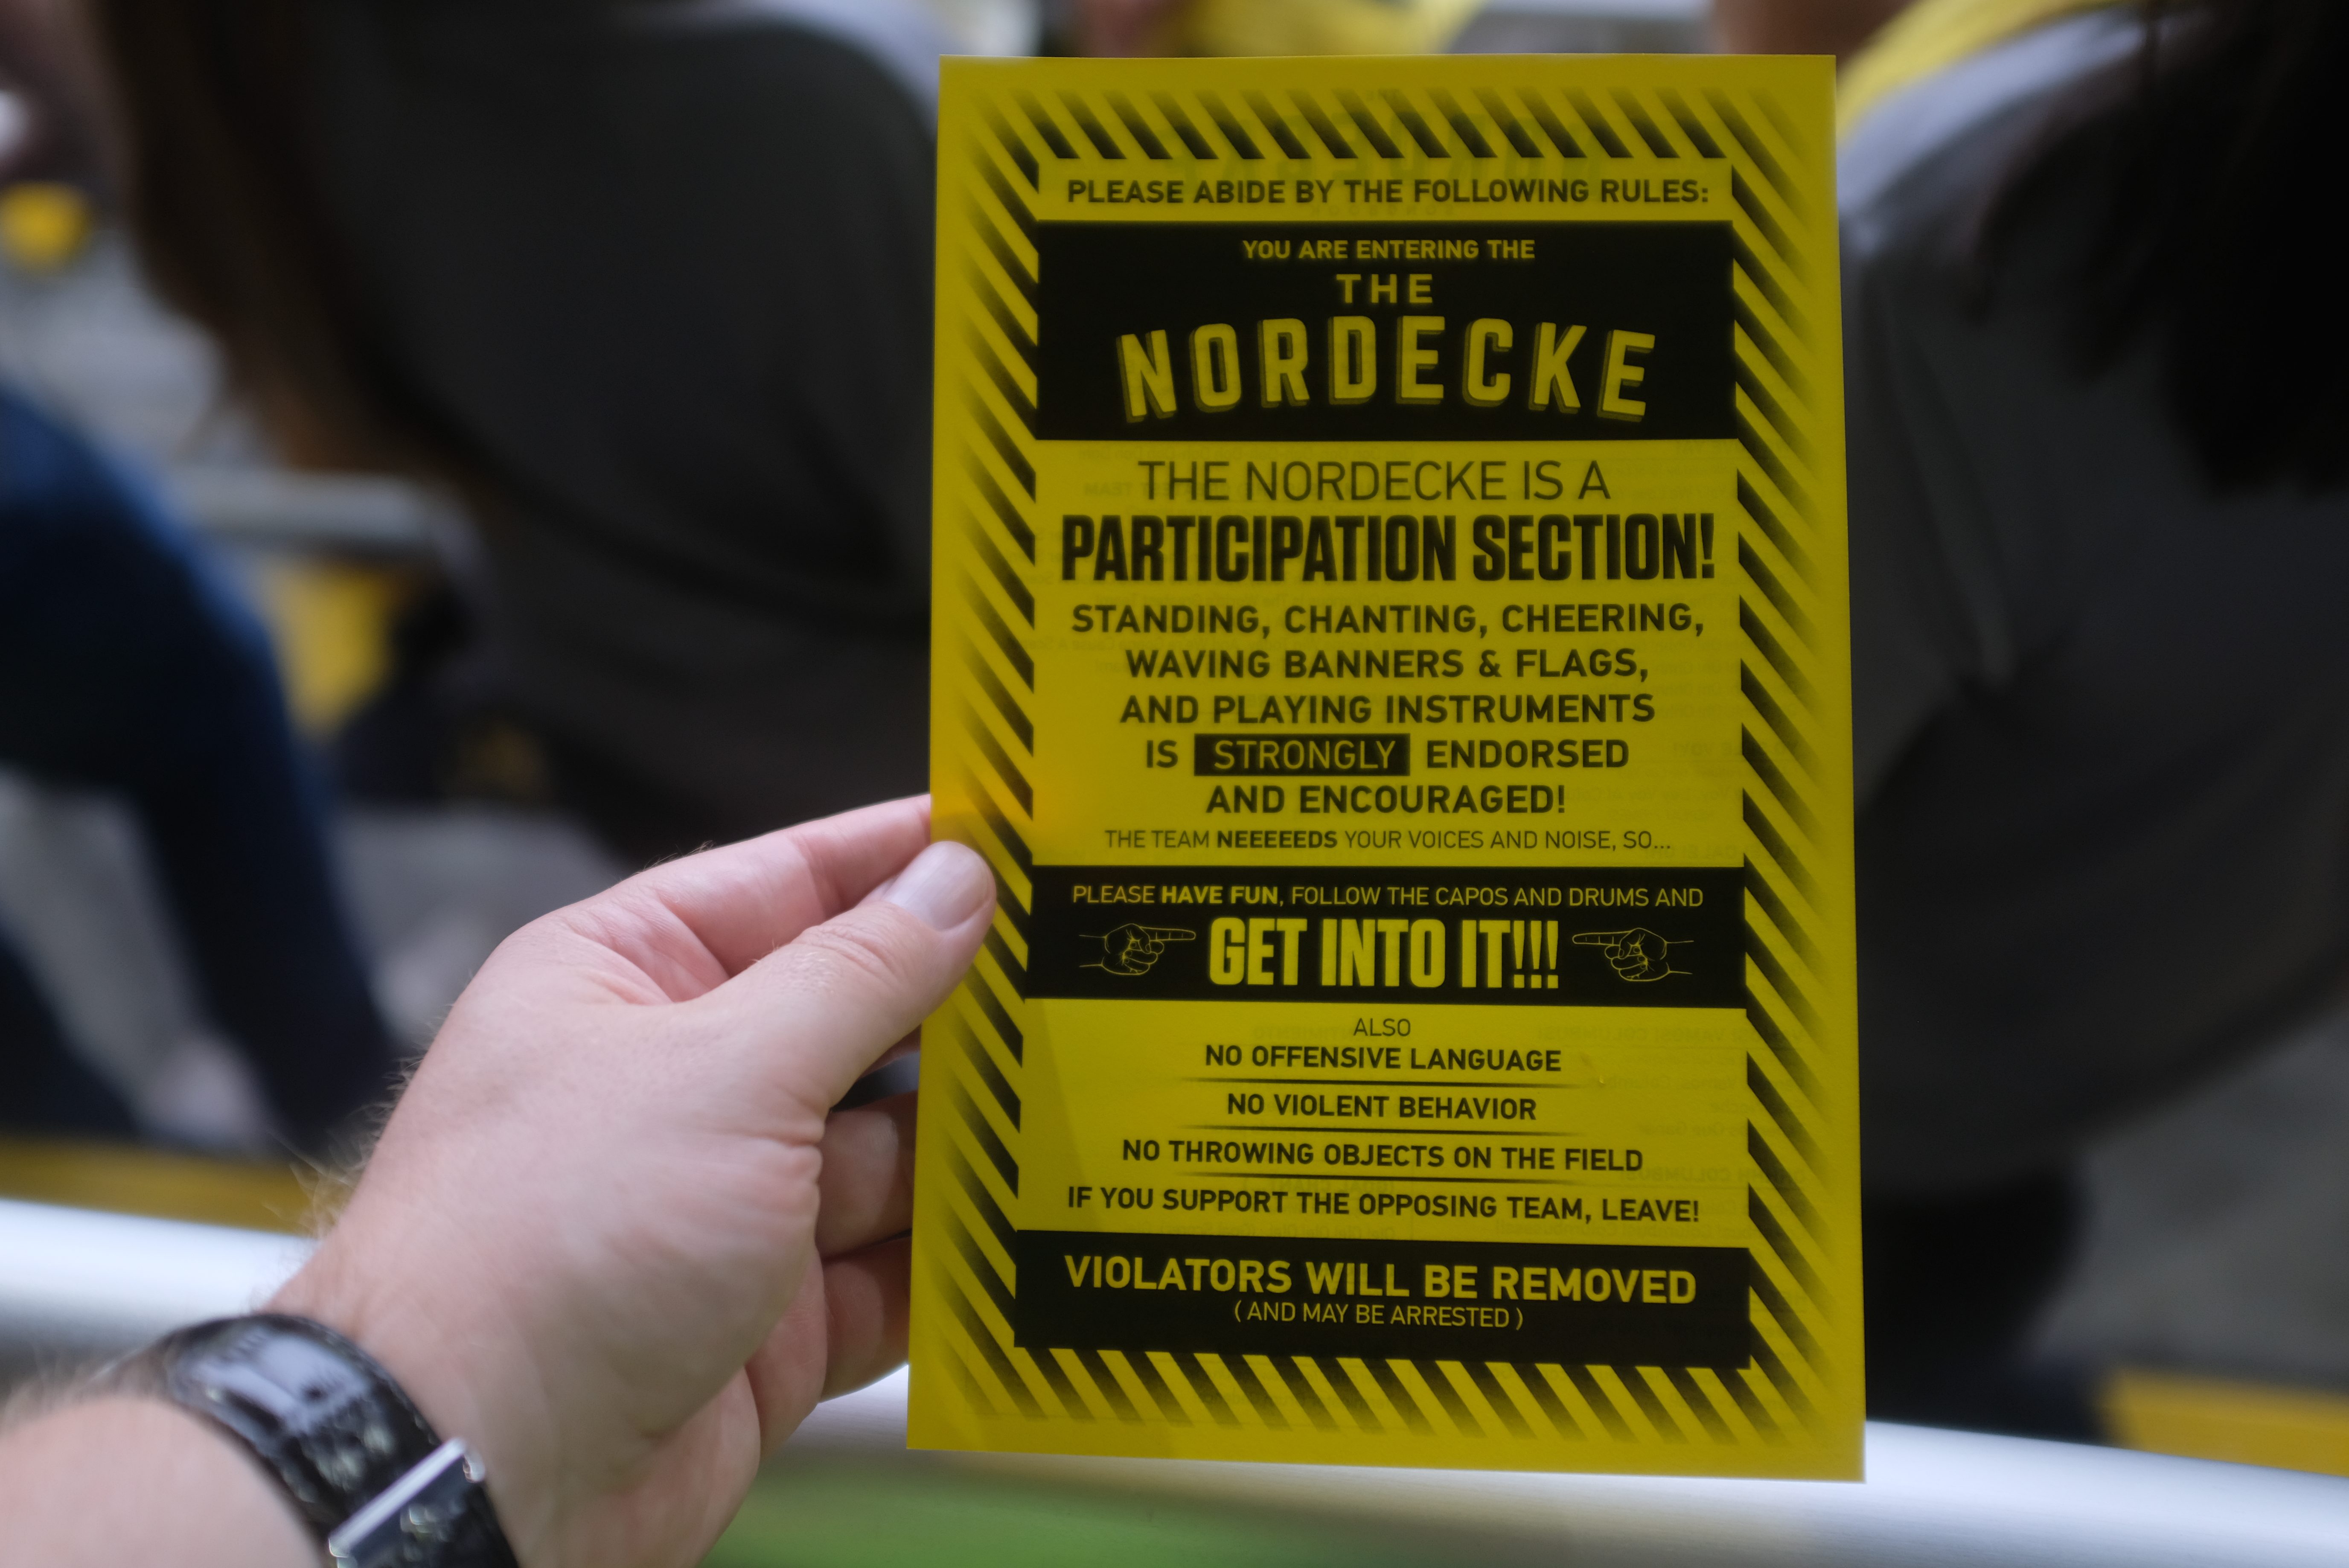 A flyer explains the rules of The Nordecke